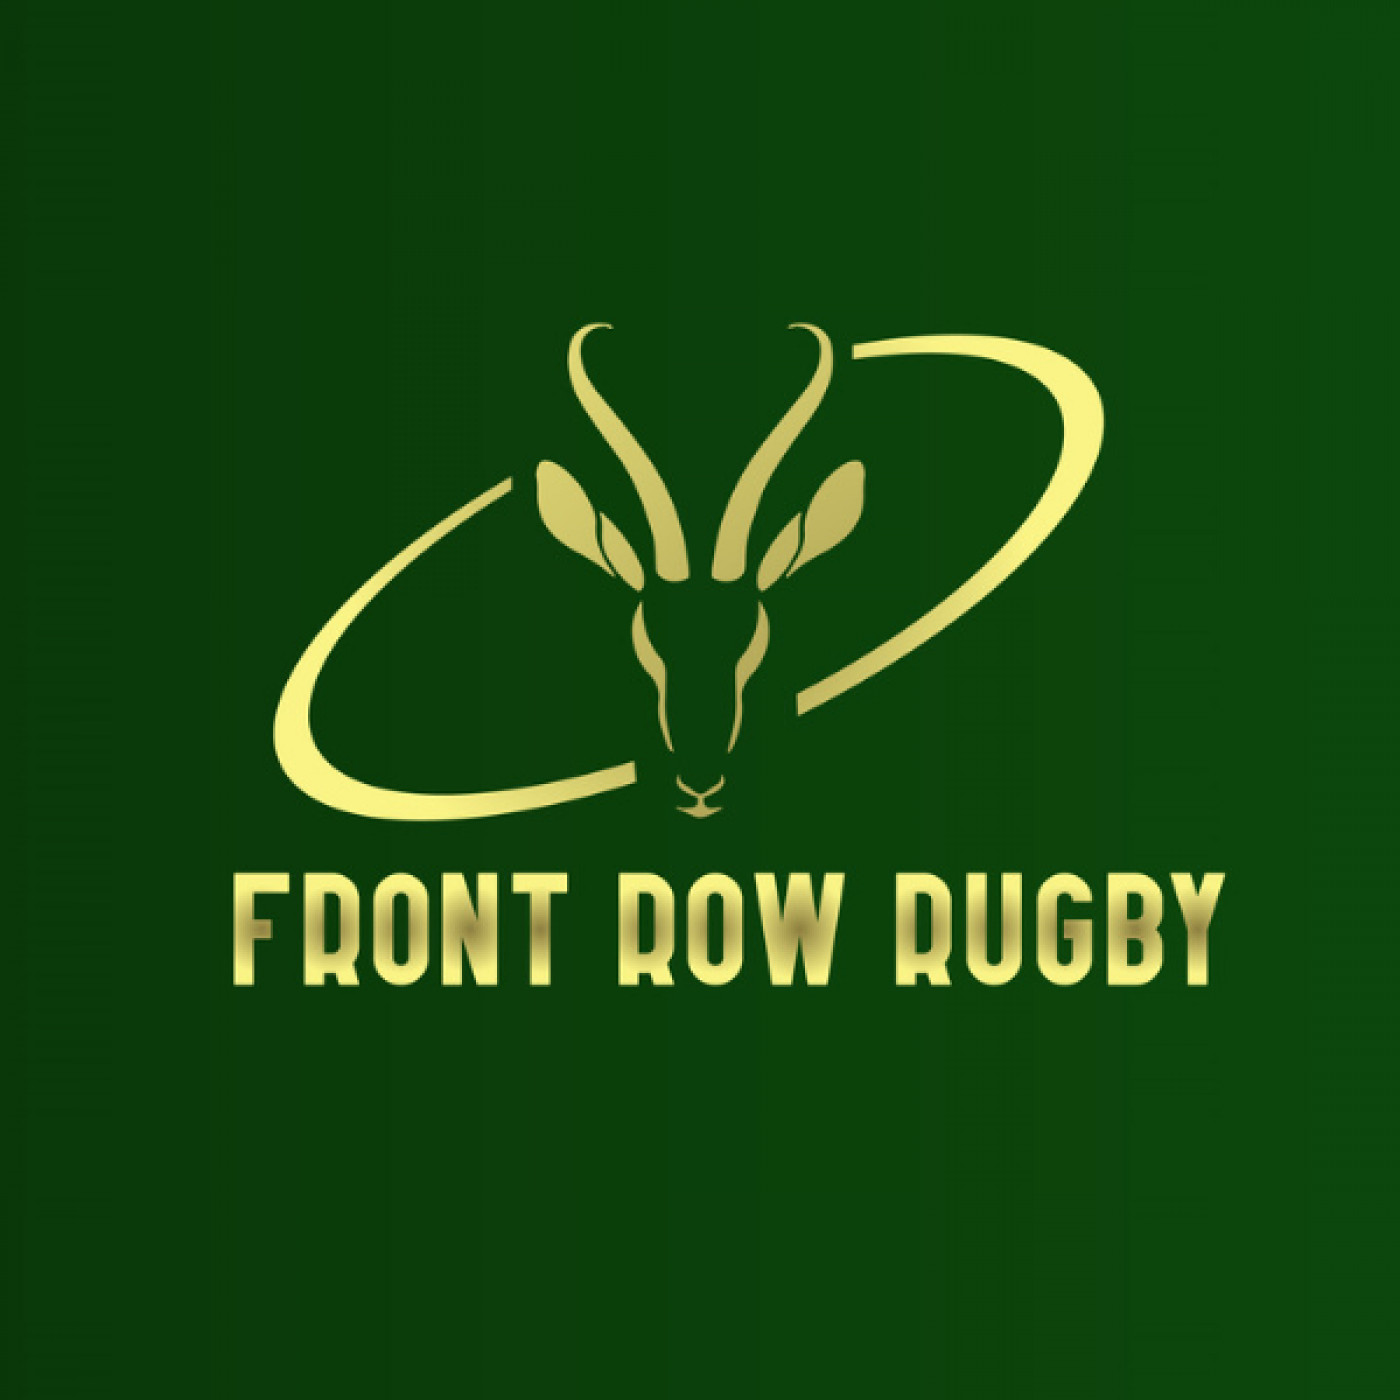 Front Row Rugby Image